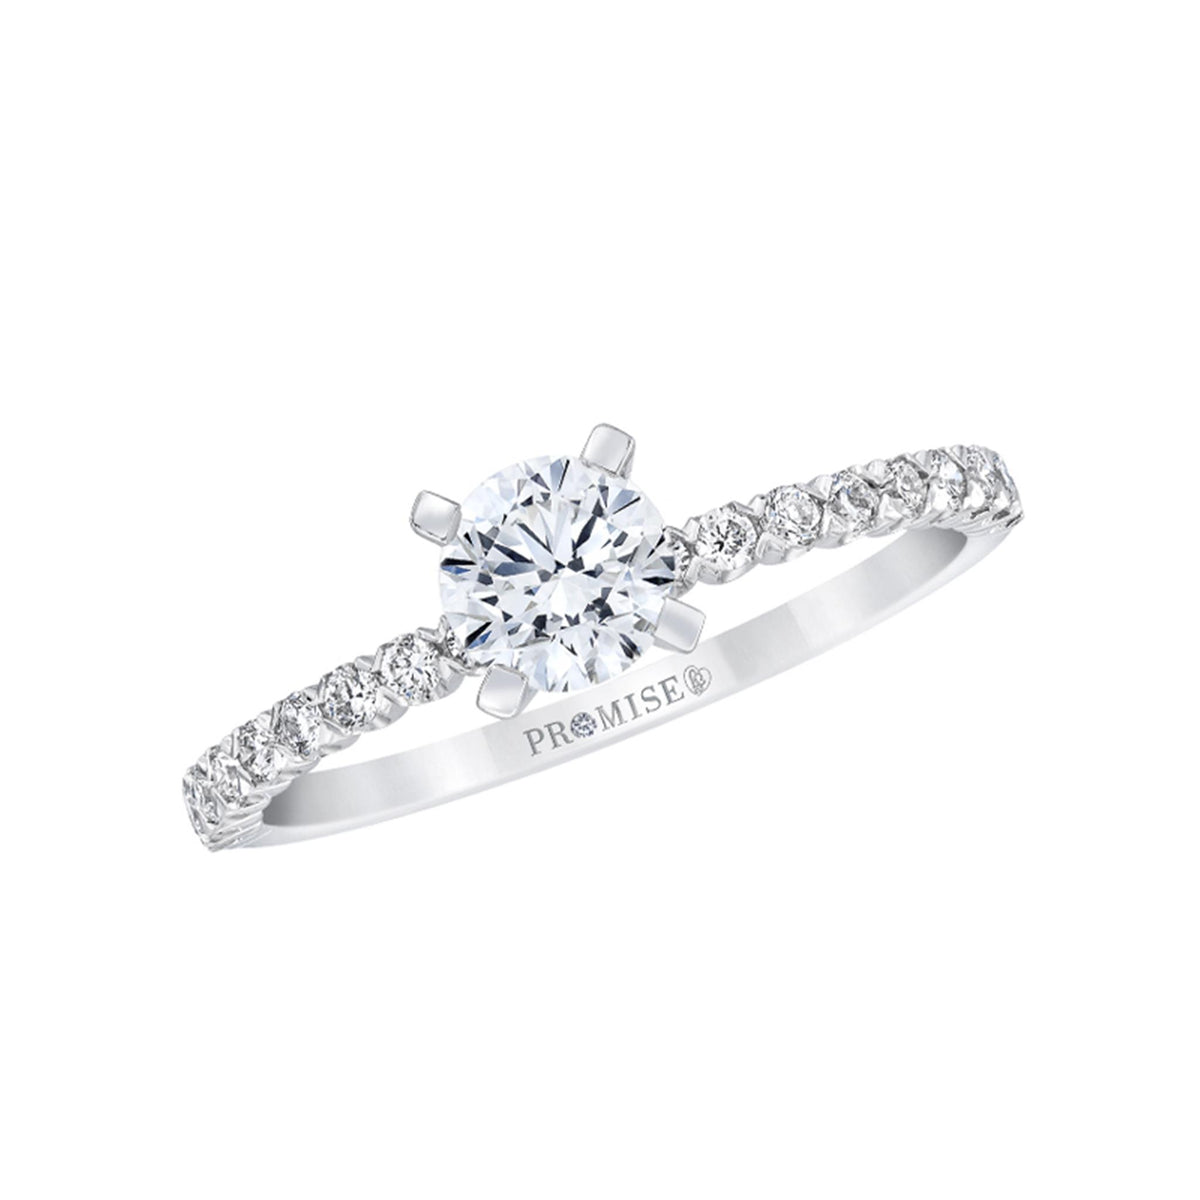 14Kt White Gold Classic Prong Engagement Ring With 1.02ct Natural Center Diamond